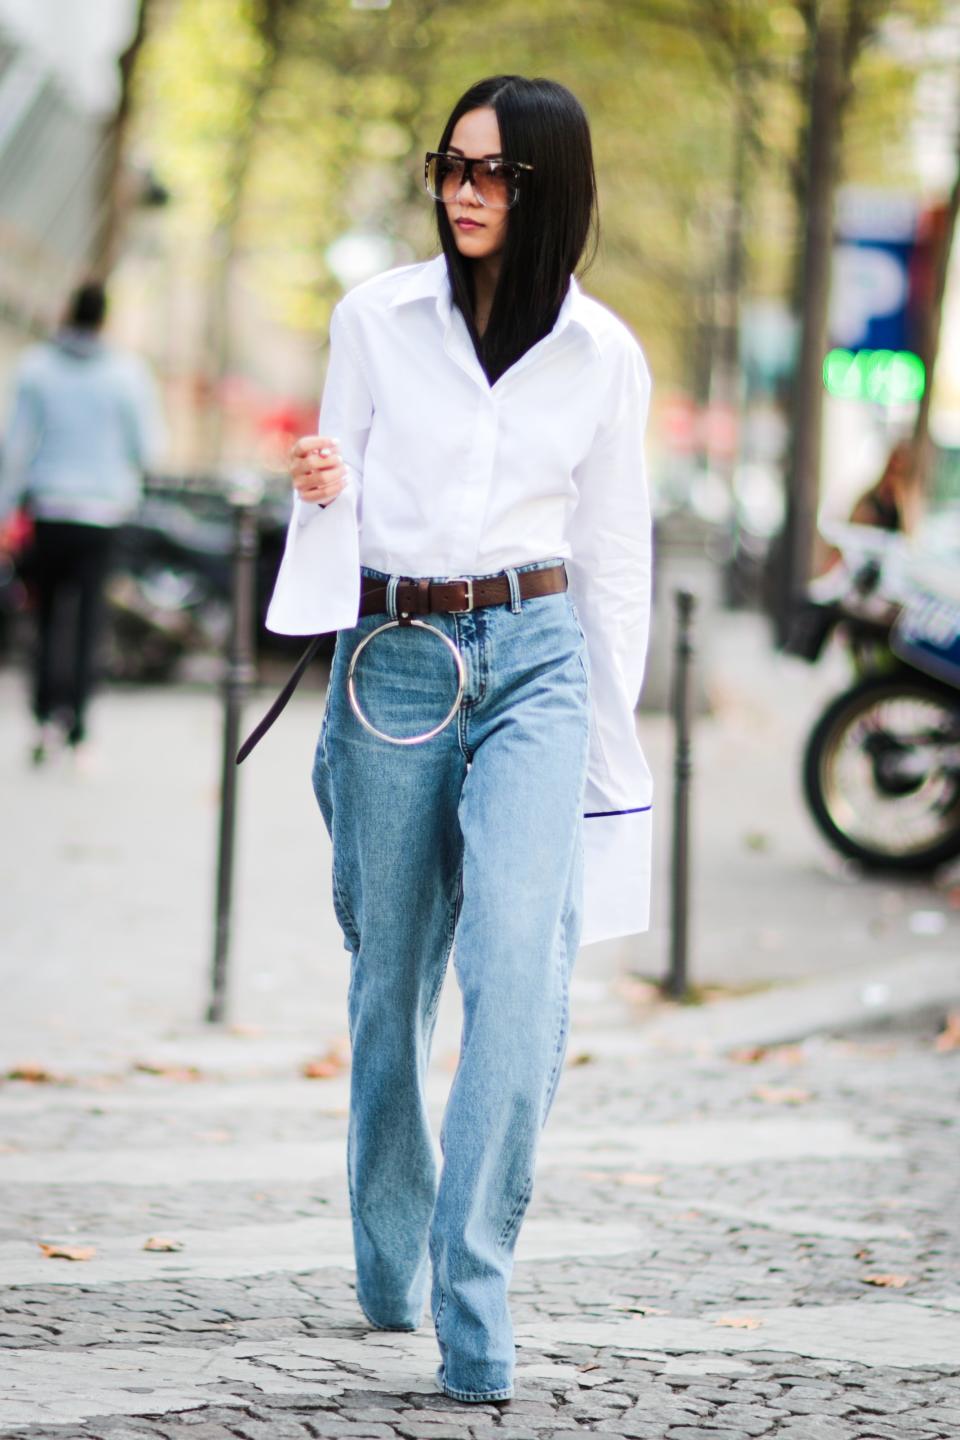 Date-Night Outfits That Include Jeans